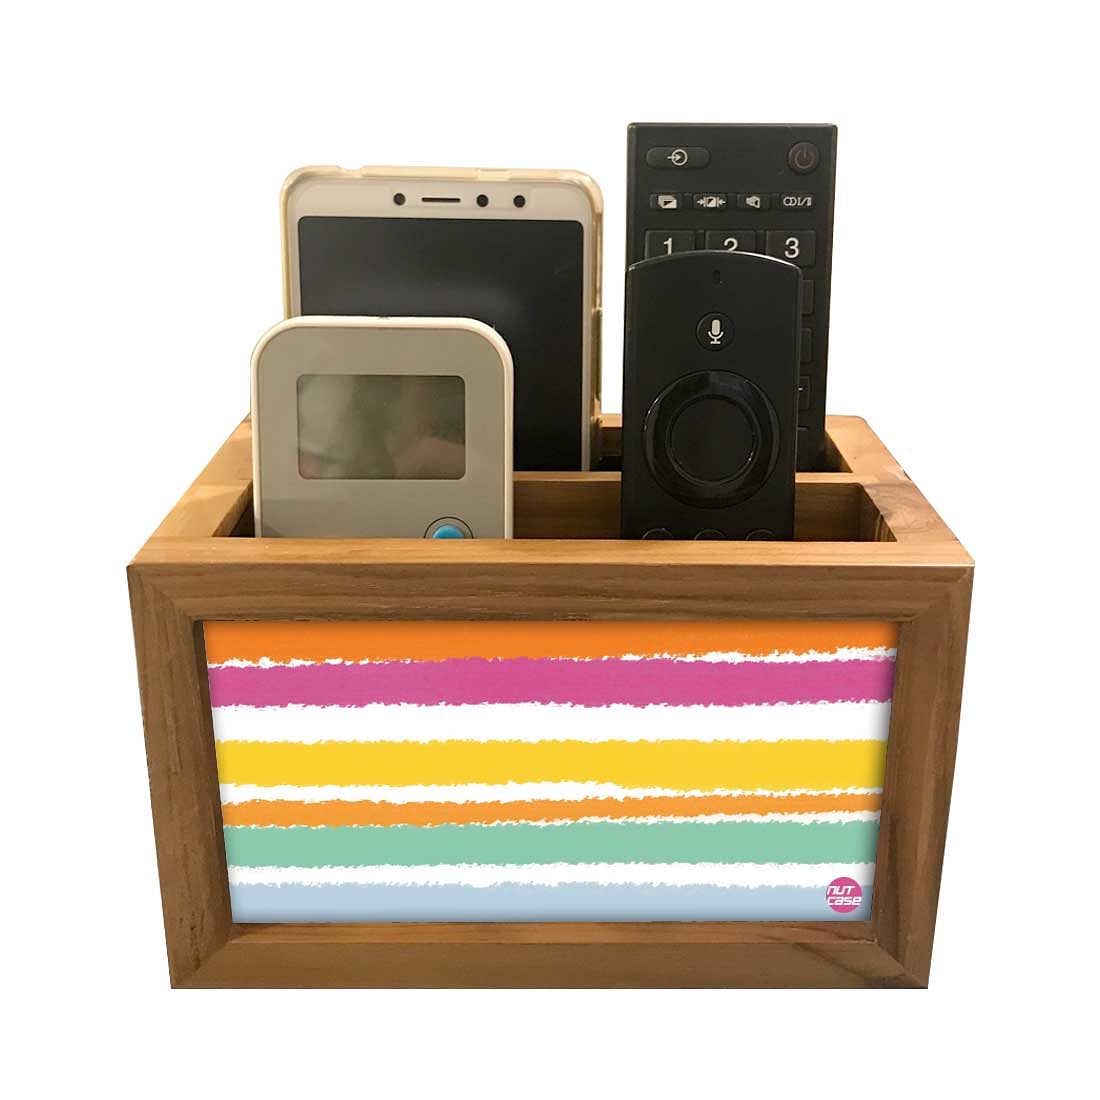 Remote Control Stand Holder Organizer For TV / AC Remotes -  Colorful Horizontal Lines Nutcase